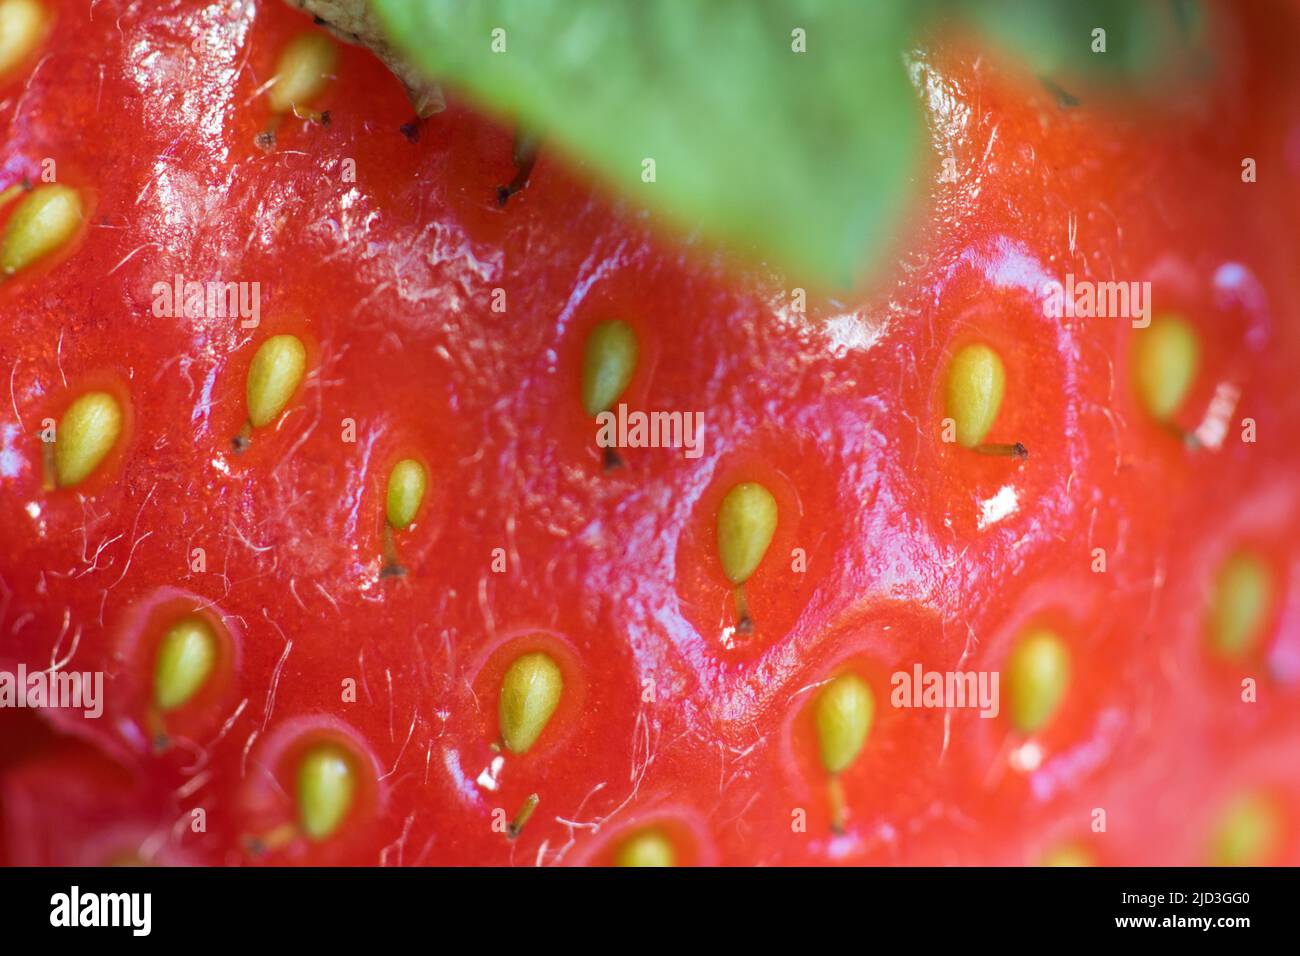 Close up detail of a fresh juicy strawberry Stock Photo